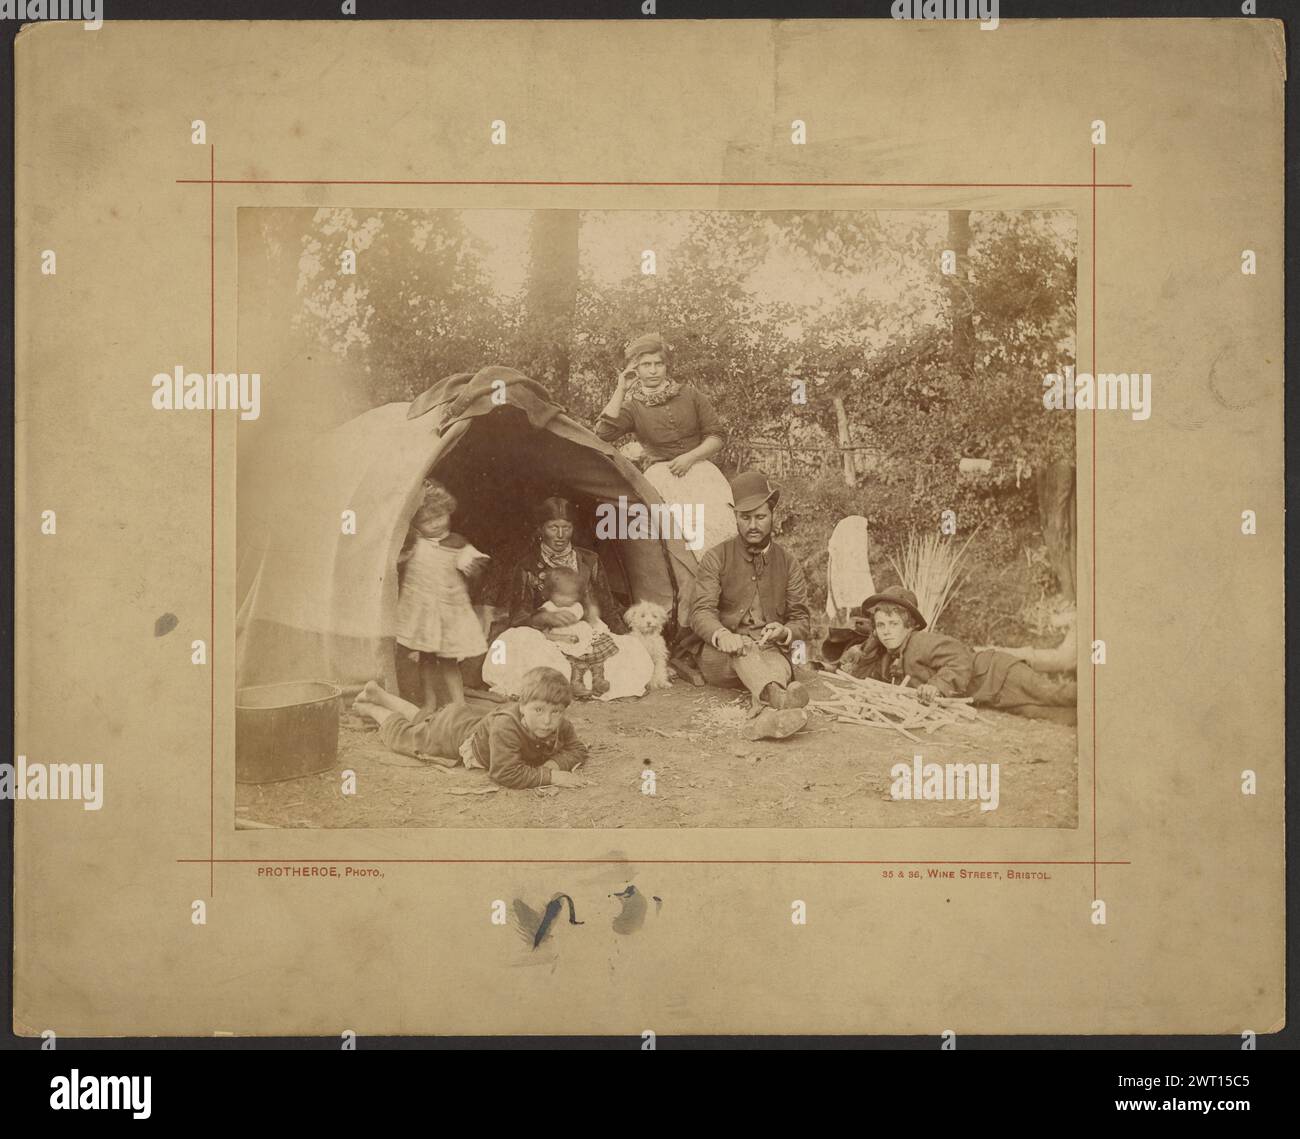 Romany family gathered around tent. T. Protheroe, photographer (British, active 1850s - 1890s) about 1855–1865 A Romany family gathered around a 'bender' tent. A woman with two young girls are in the tent, a man and two boys on the ground outside. Another woman rests her arm along the top of the tent. (Recto, mount) lower left, imprint in red ink: 'Protheroe, Photo.,'; Lower right, imprint in red ink: '35 and 37, Wine Street, Bristol'; Stock Photo